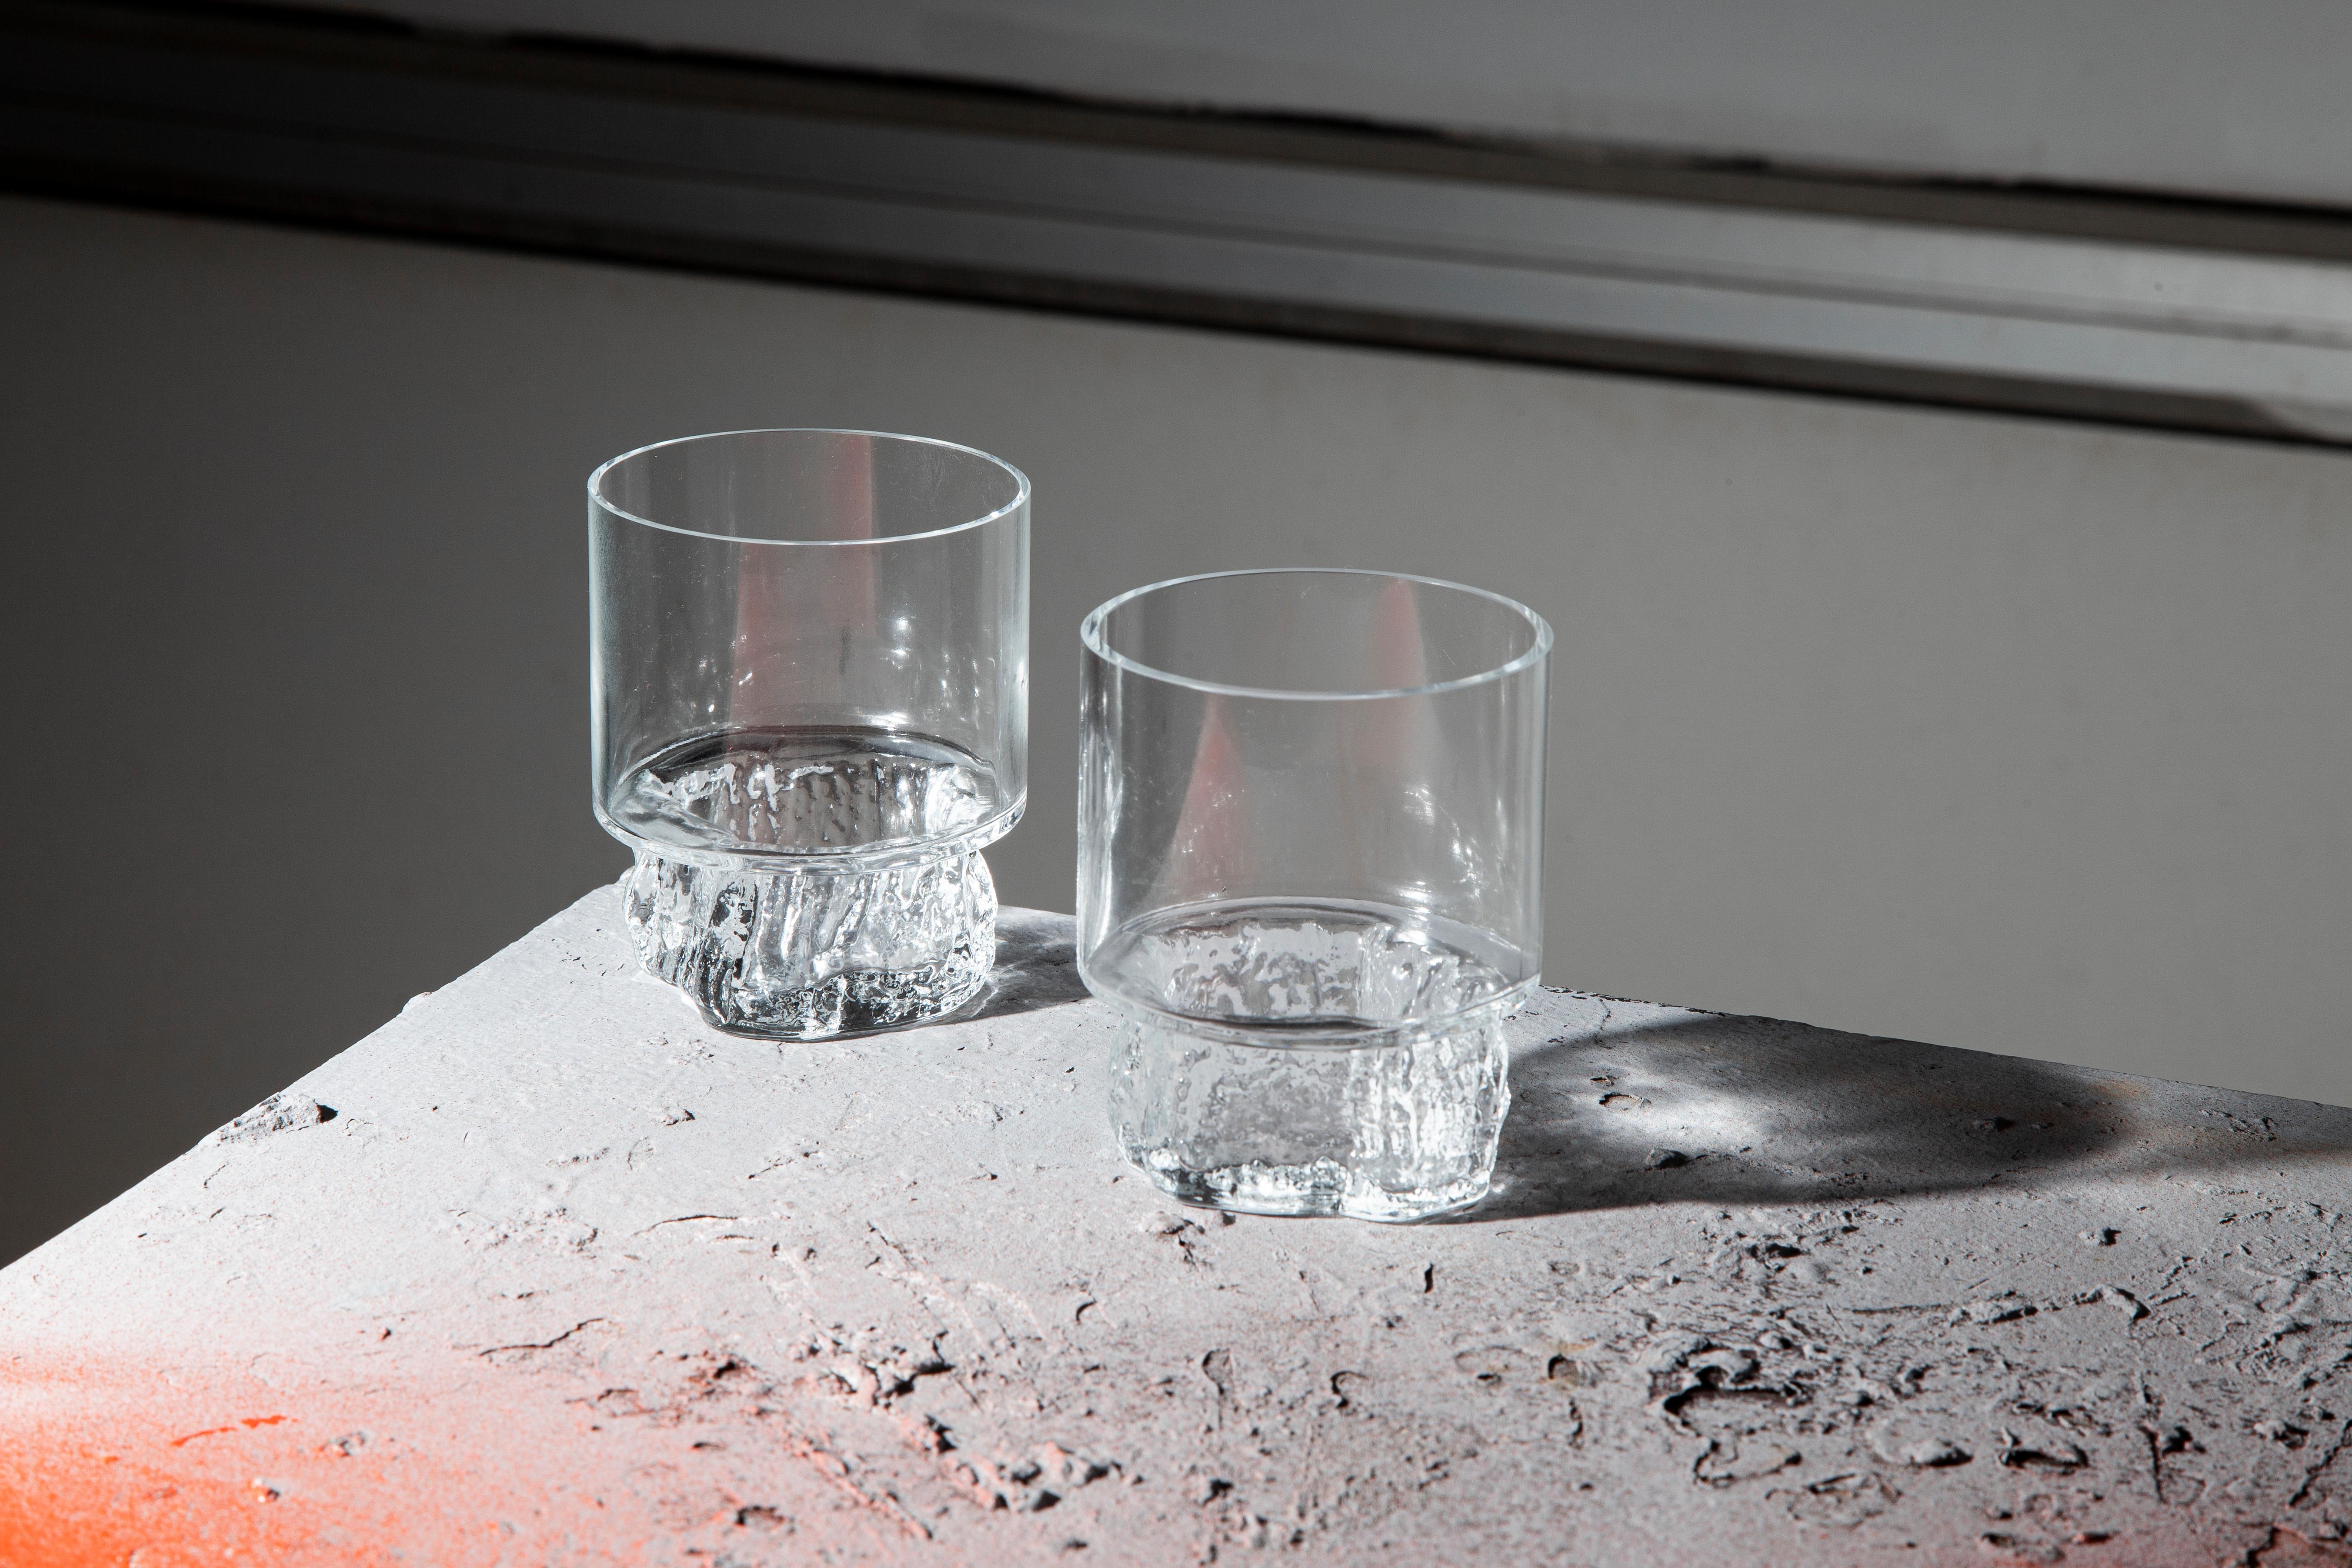 Cerne - meaning the tree's heartwood - is the name of this glassware set composed by two glasses and one bottle, which comes with an elegant carob wood and cork lid. Designed by Samuel Reis and handmade in Portugal, Cerne comes into shape by blowing